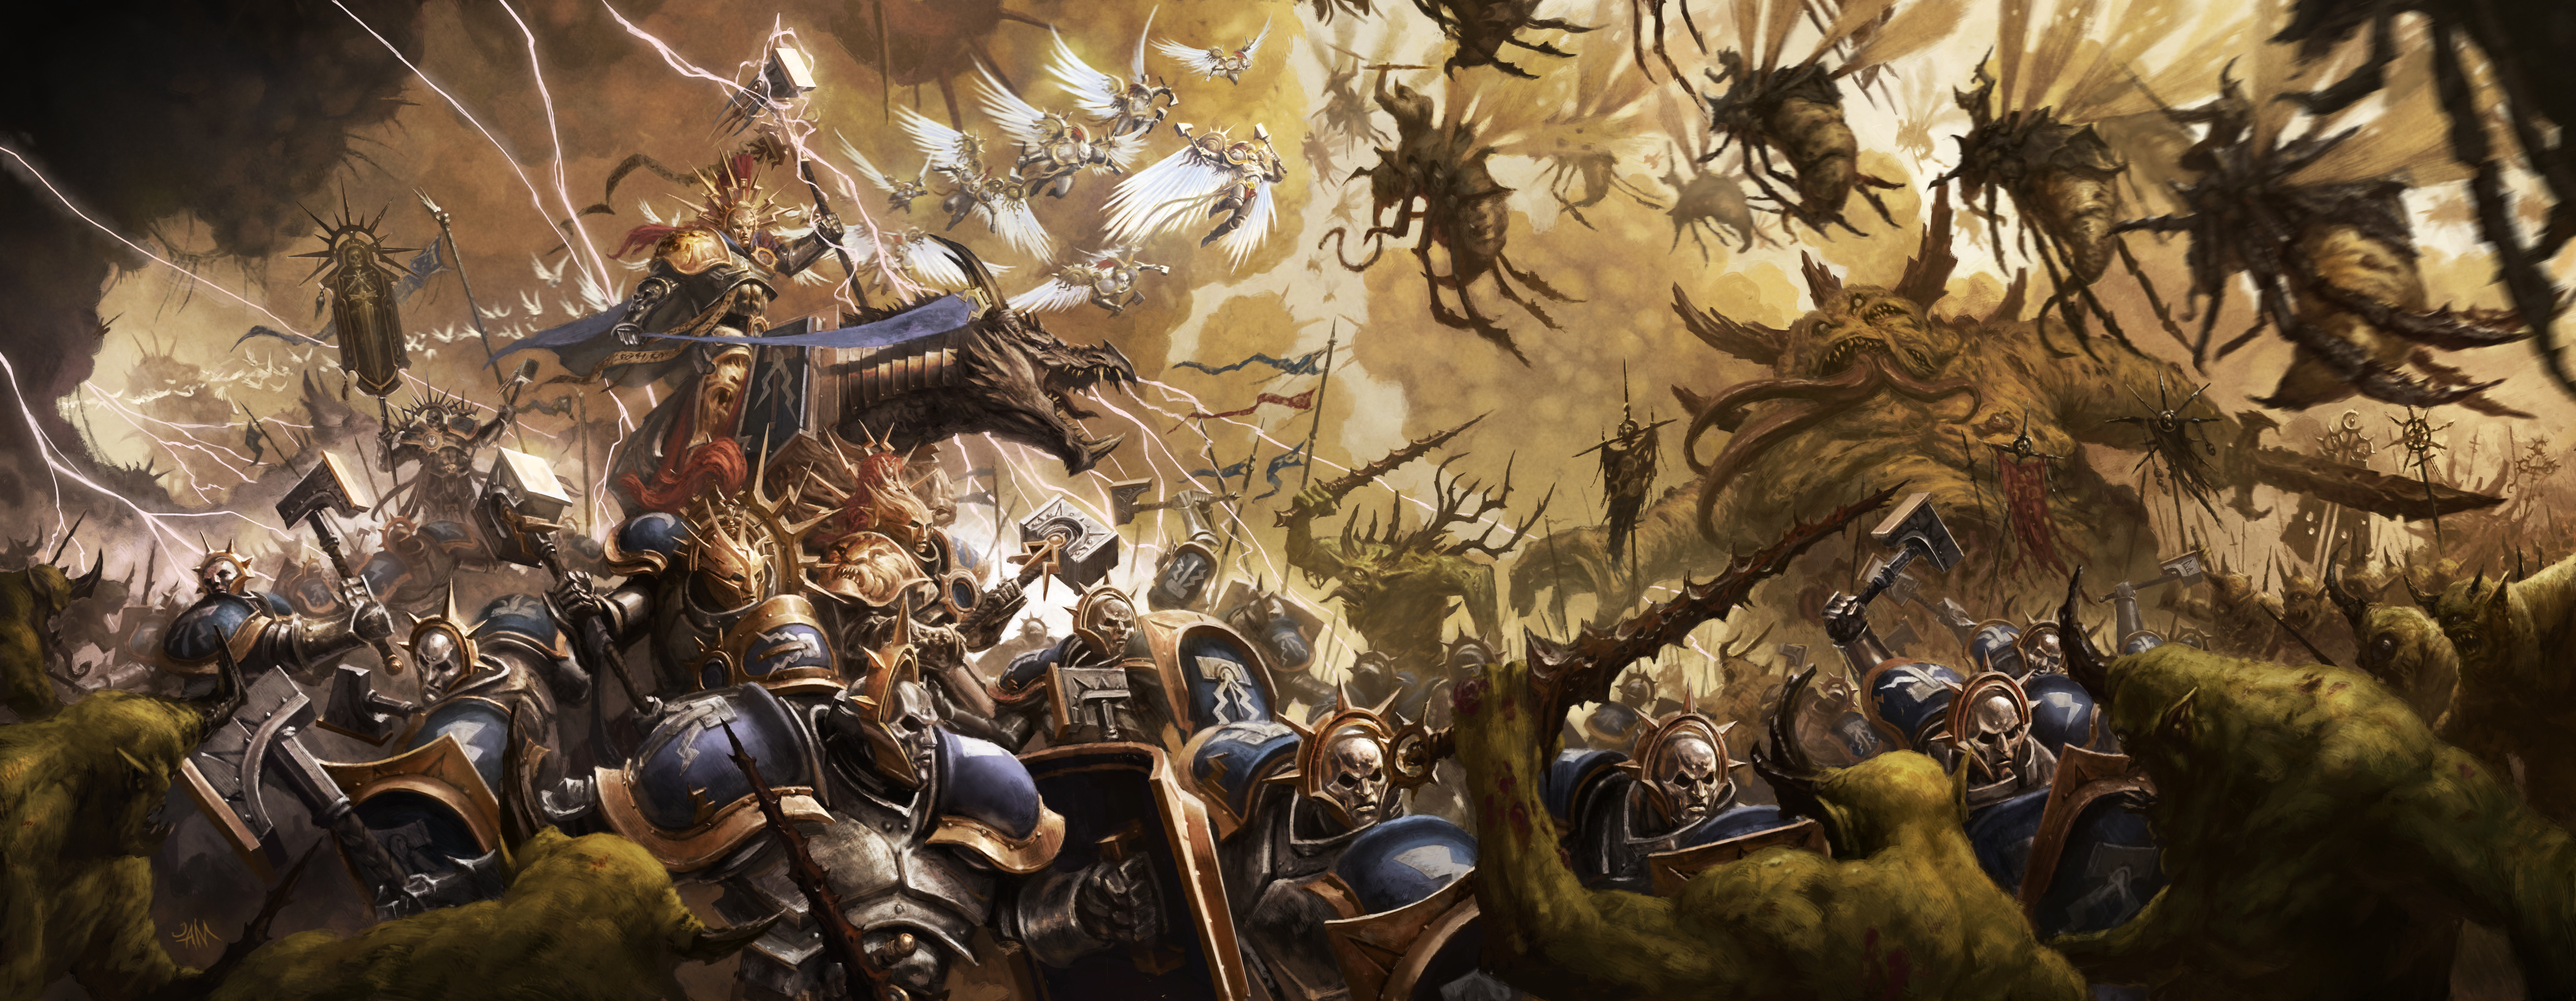 Video Game Warhammer Age of Sigmar HD Wallpaper | Background Image